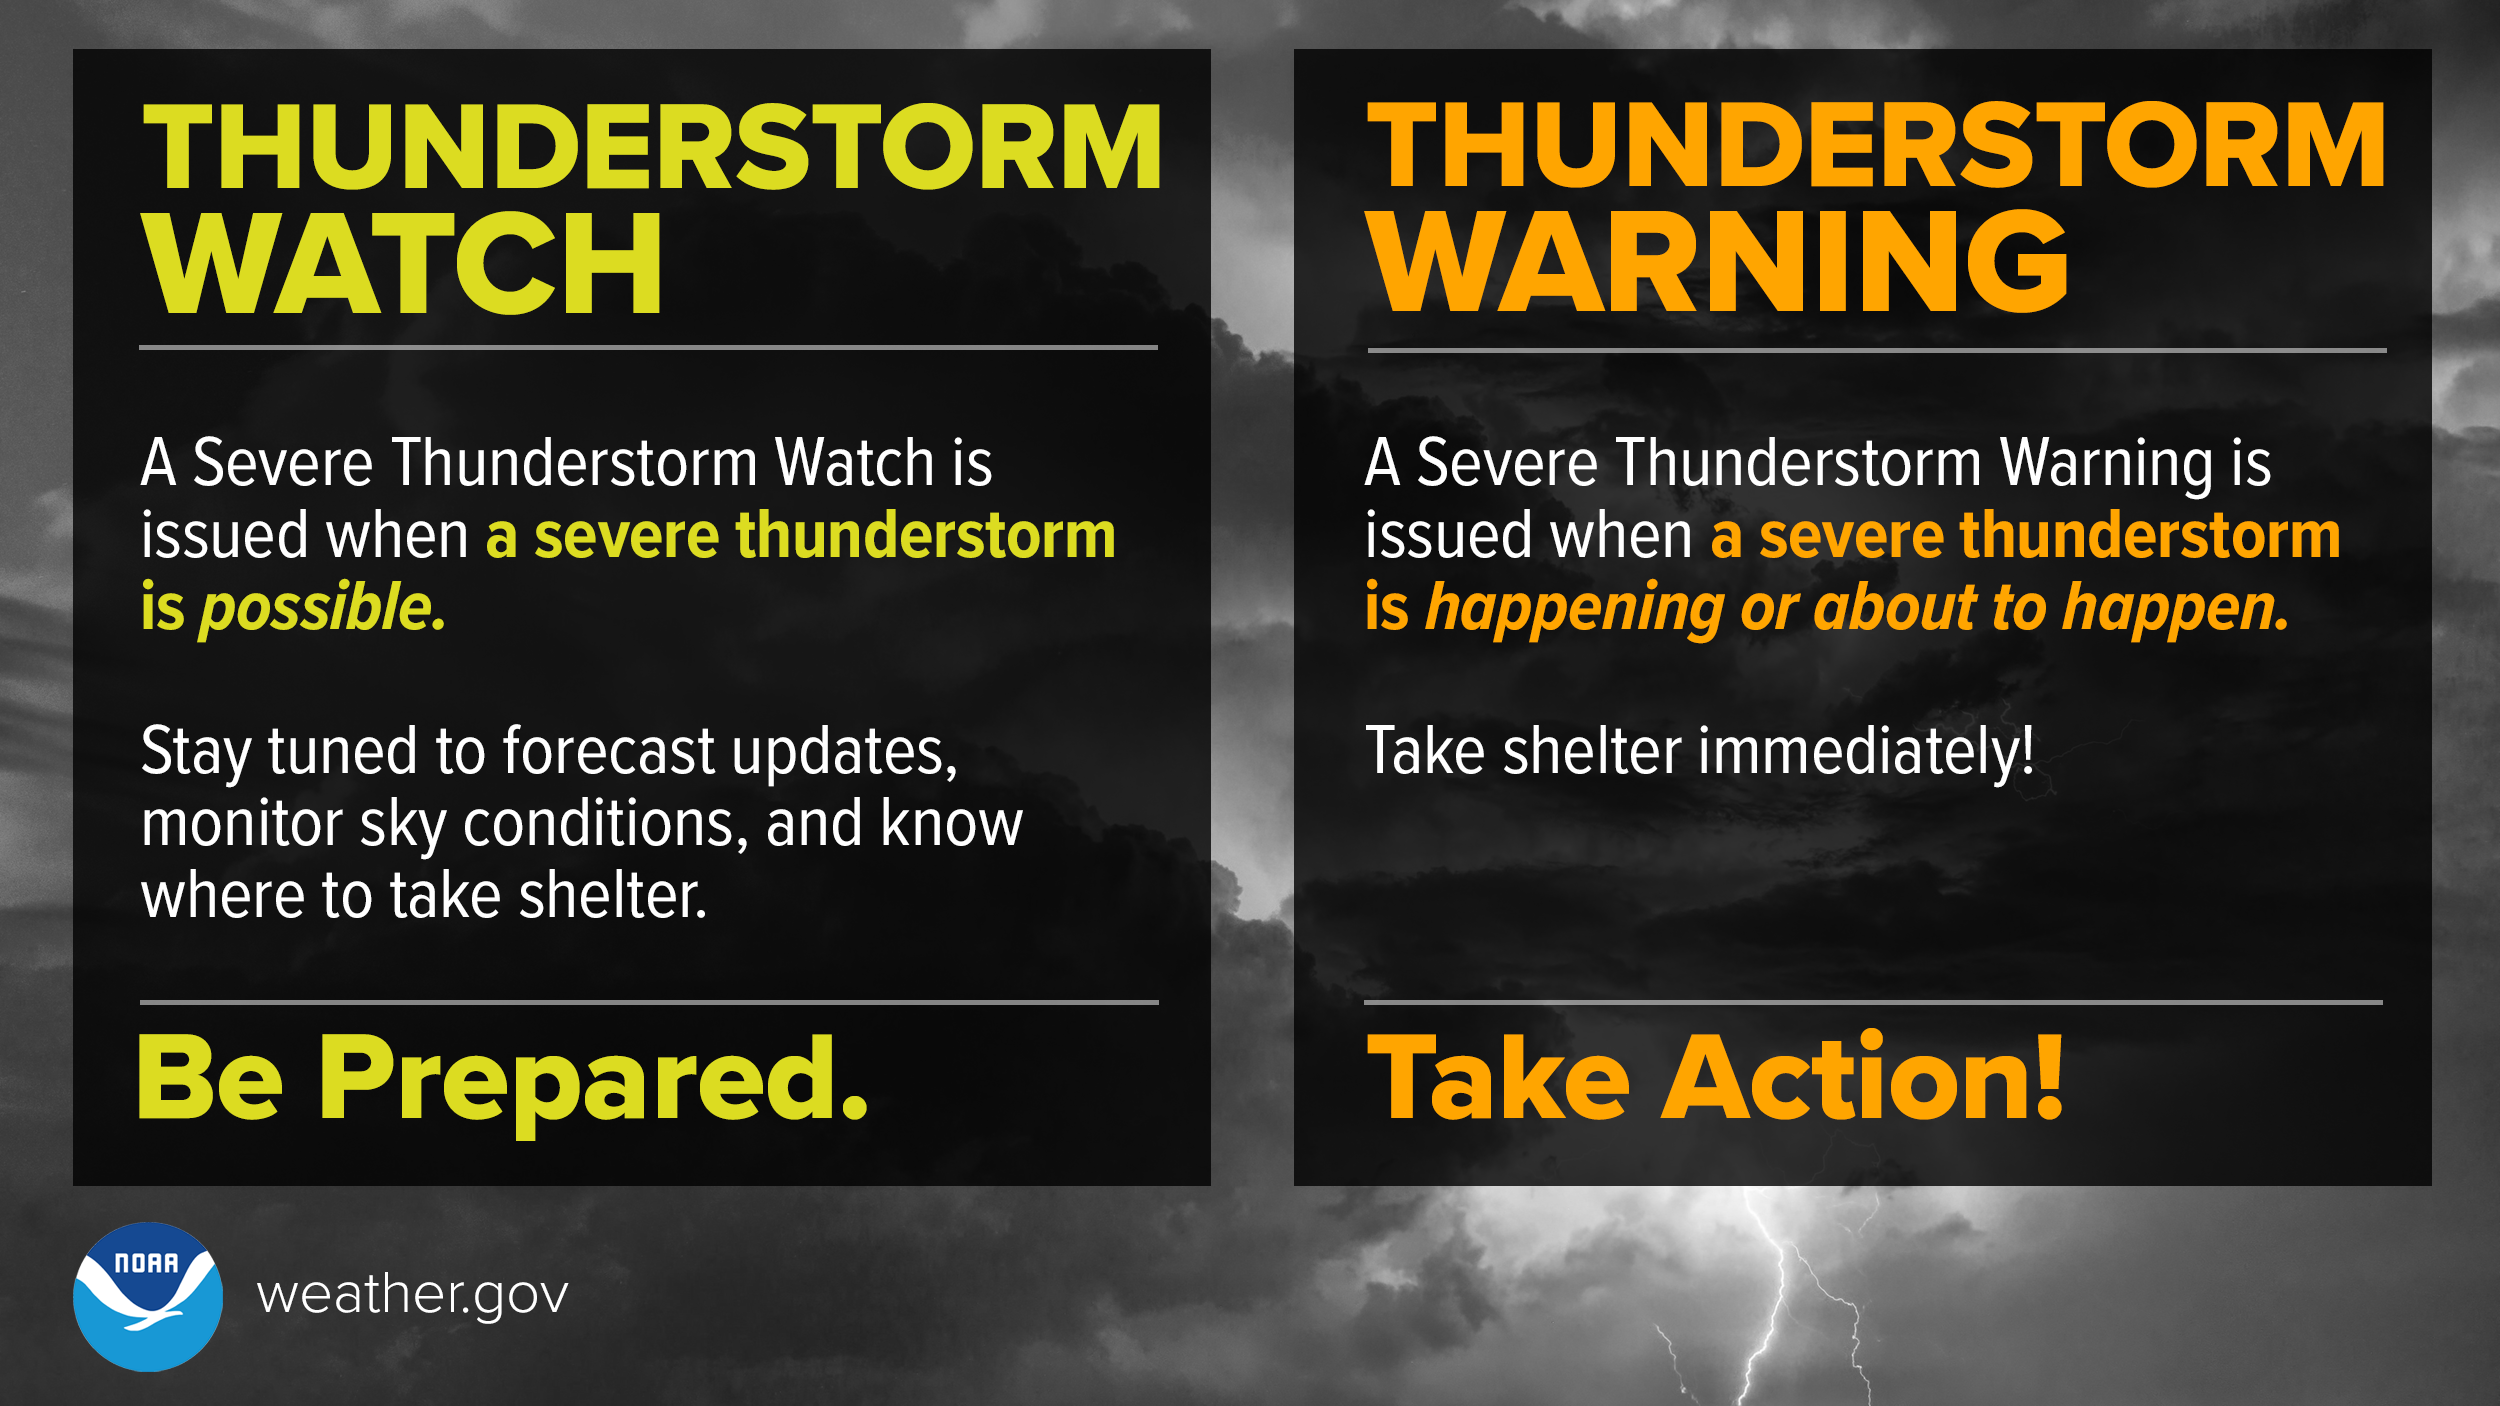 A Severe Thunderstorm Watch is issued when severe storms are possible. Pay attention to the forecast, keep an eye on sky conditions, and know where to take shelter. Get Ready. A Severe Thunderstorm Warning is issued when a severe storm is occurring or is imminent. Take shelter immediately! Take action!